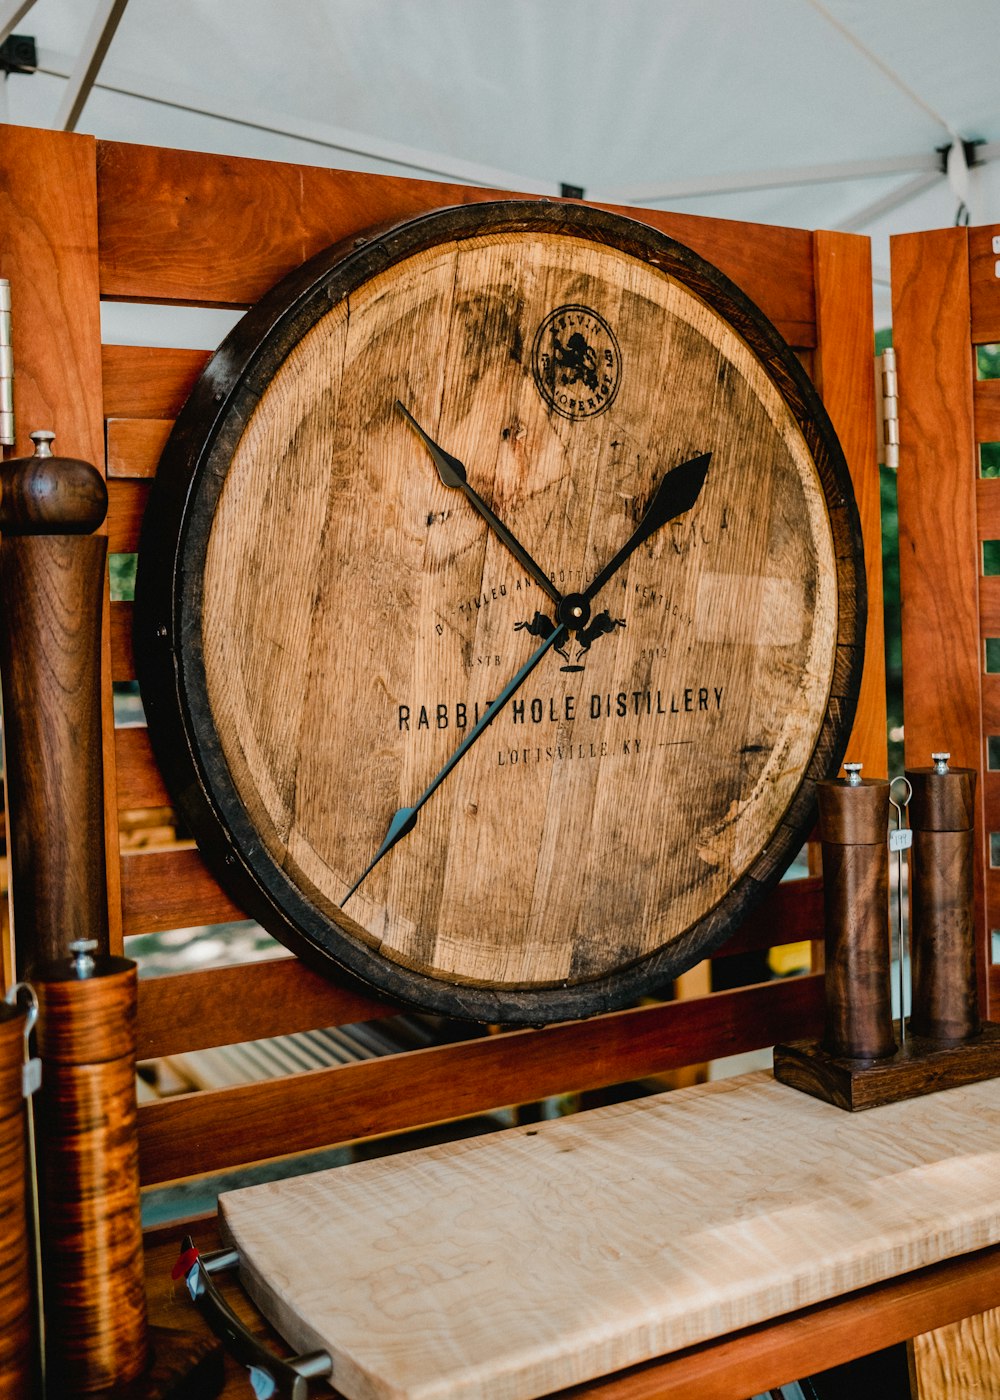 a clock made out of a wooden barrel